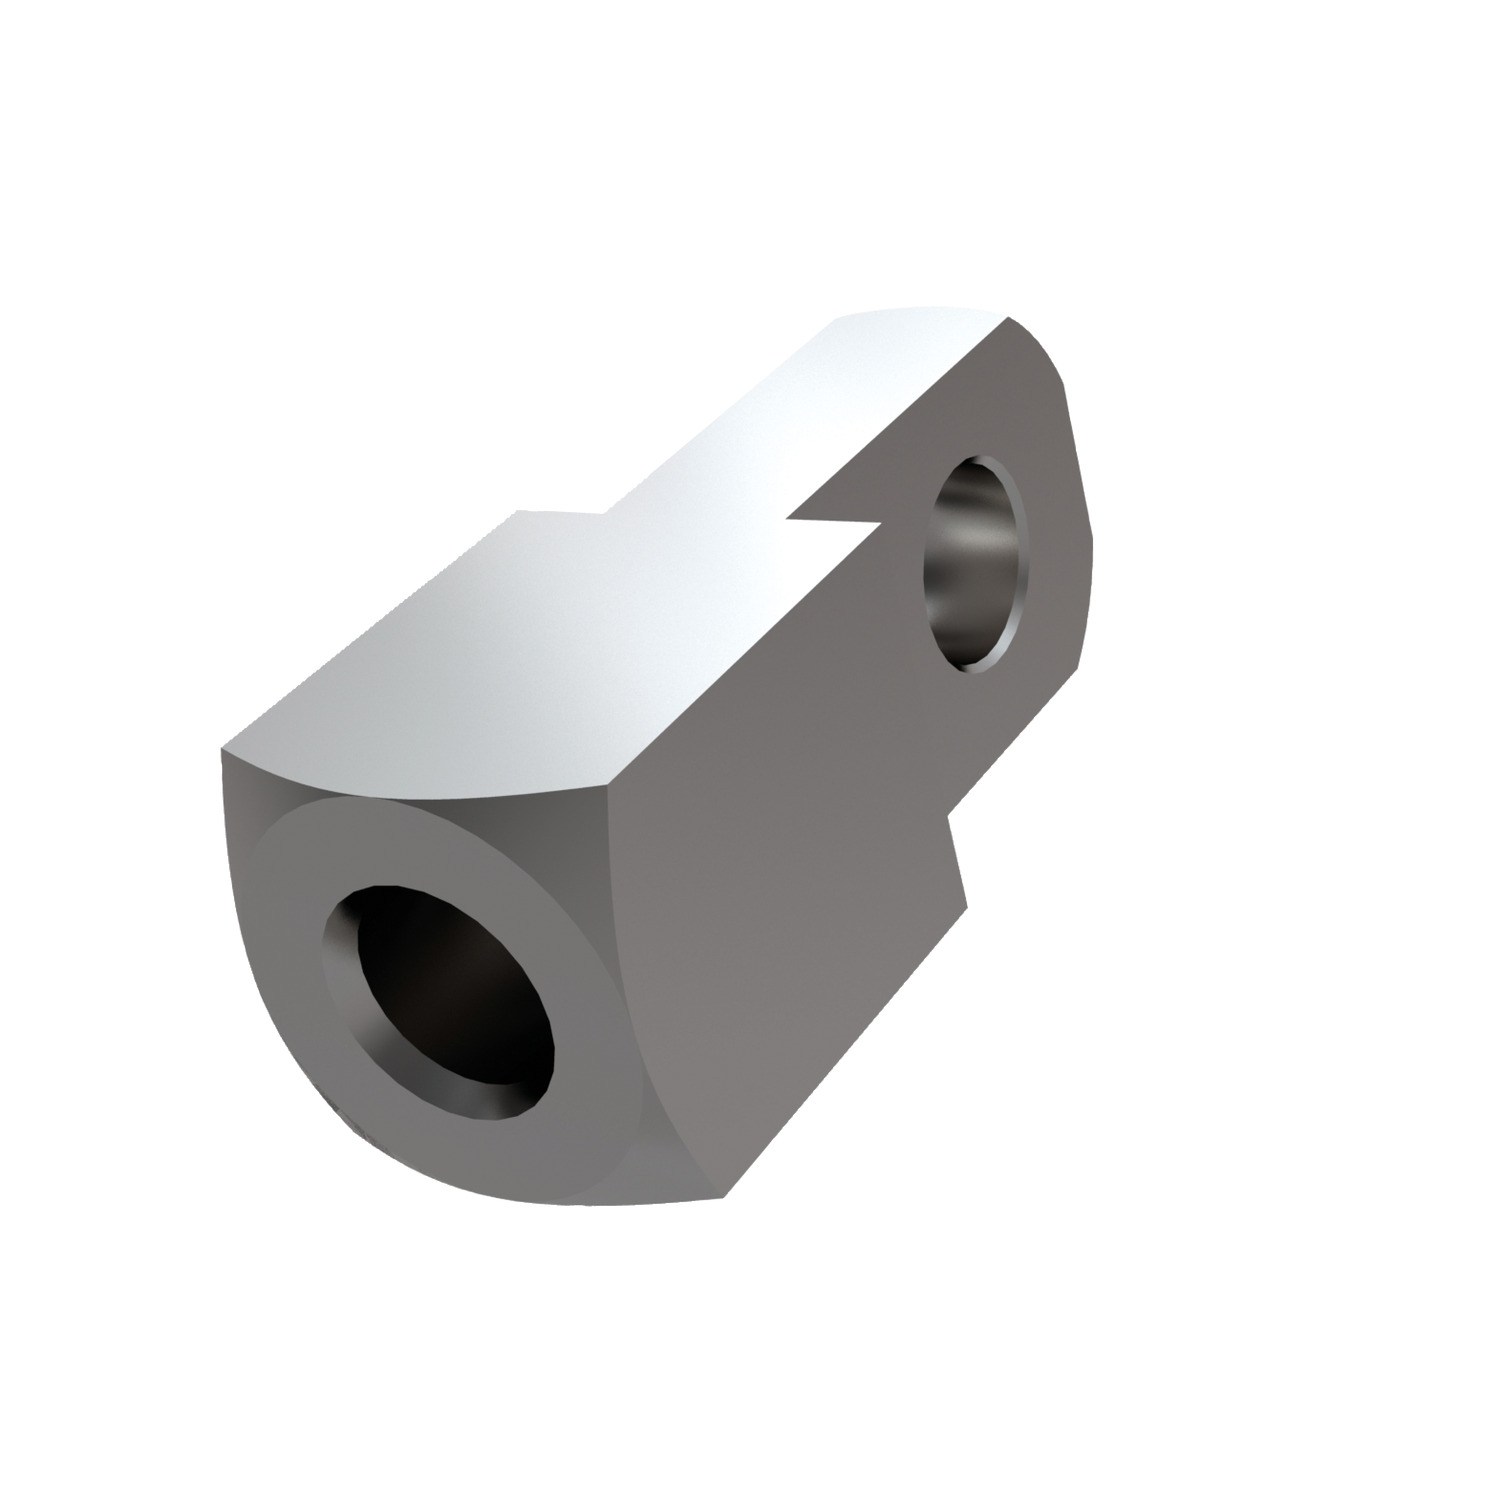 Product 65656, Stainless Mating Piece for Clevis Joints  / 